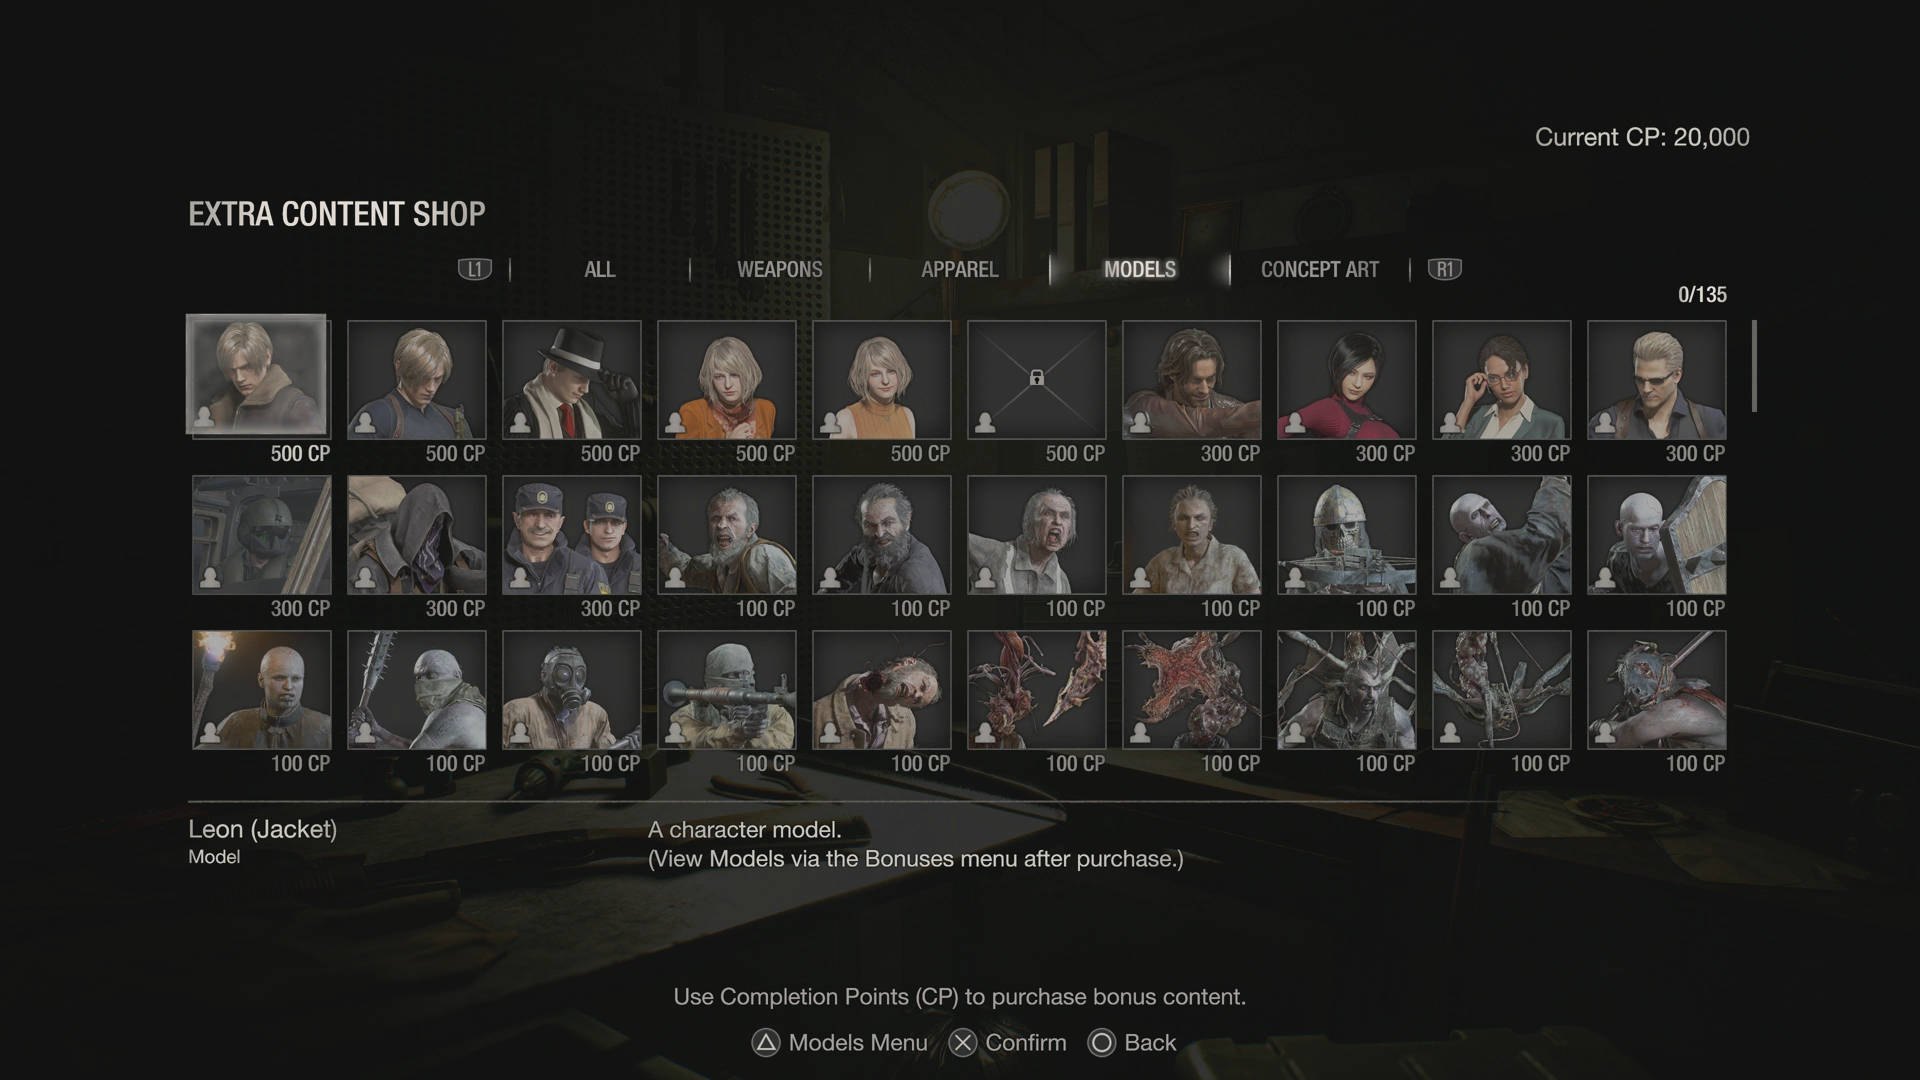 Resident Evil 4 Mods Character - Colaboratory